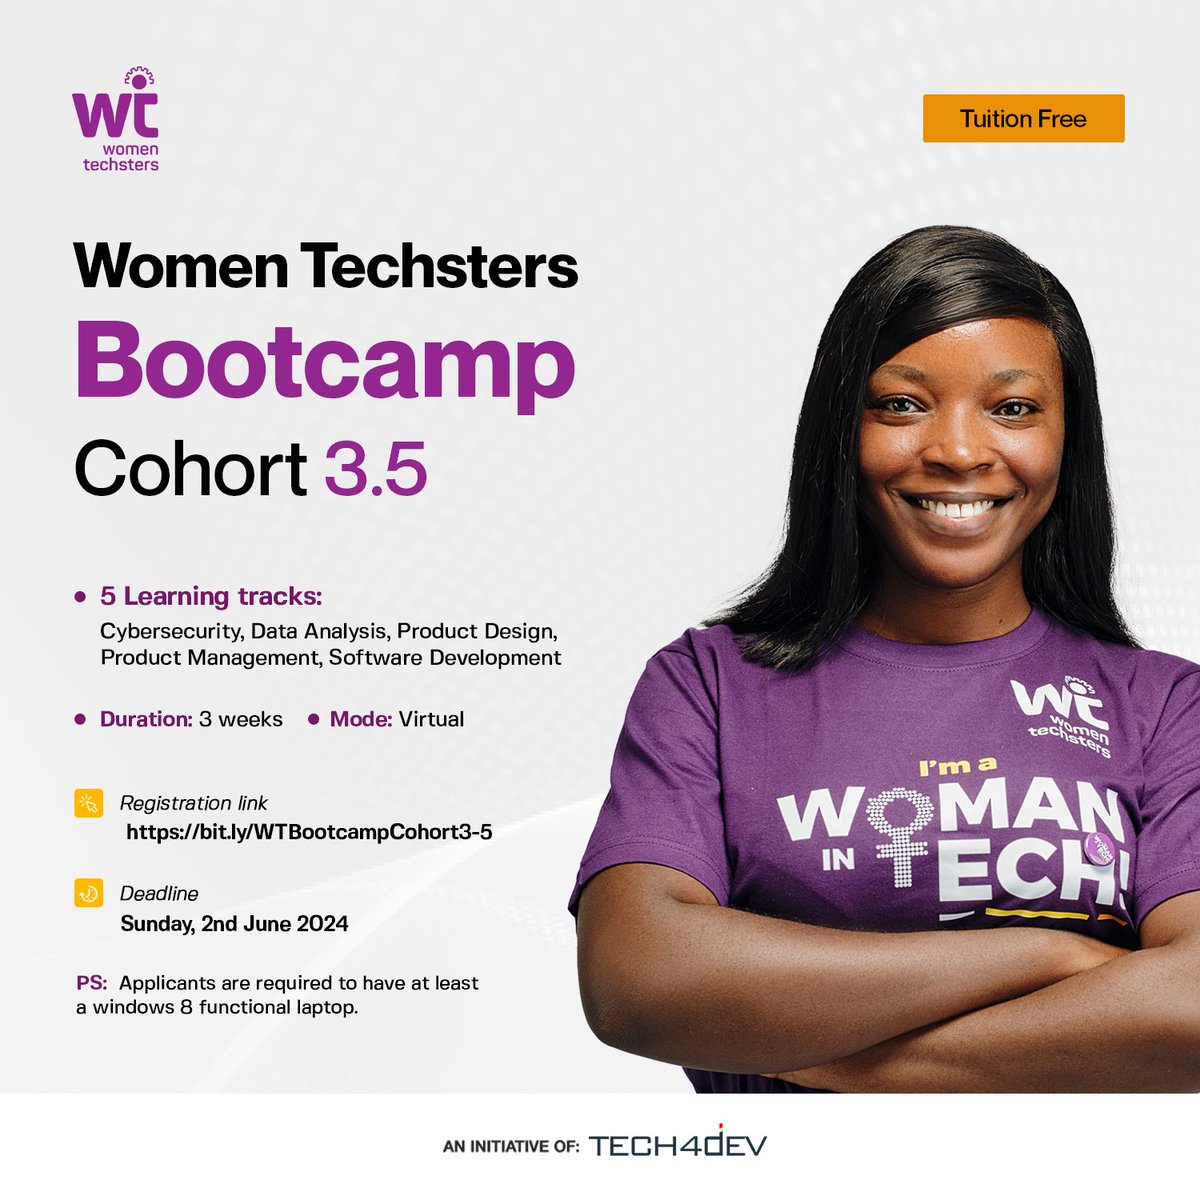 Ready to launch your tech career? Applications for Women Techsters Bootcamp Cohort 3.5 is officially open. Join us for a 3-week, FREE training program designed to equip you with in-demand skills in: • Product Design • Product Management • Cybersecurity • Data Analysis